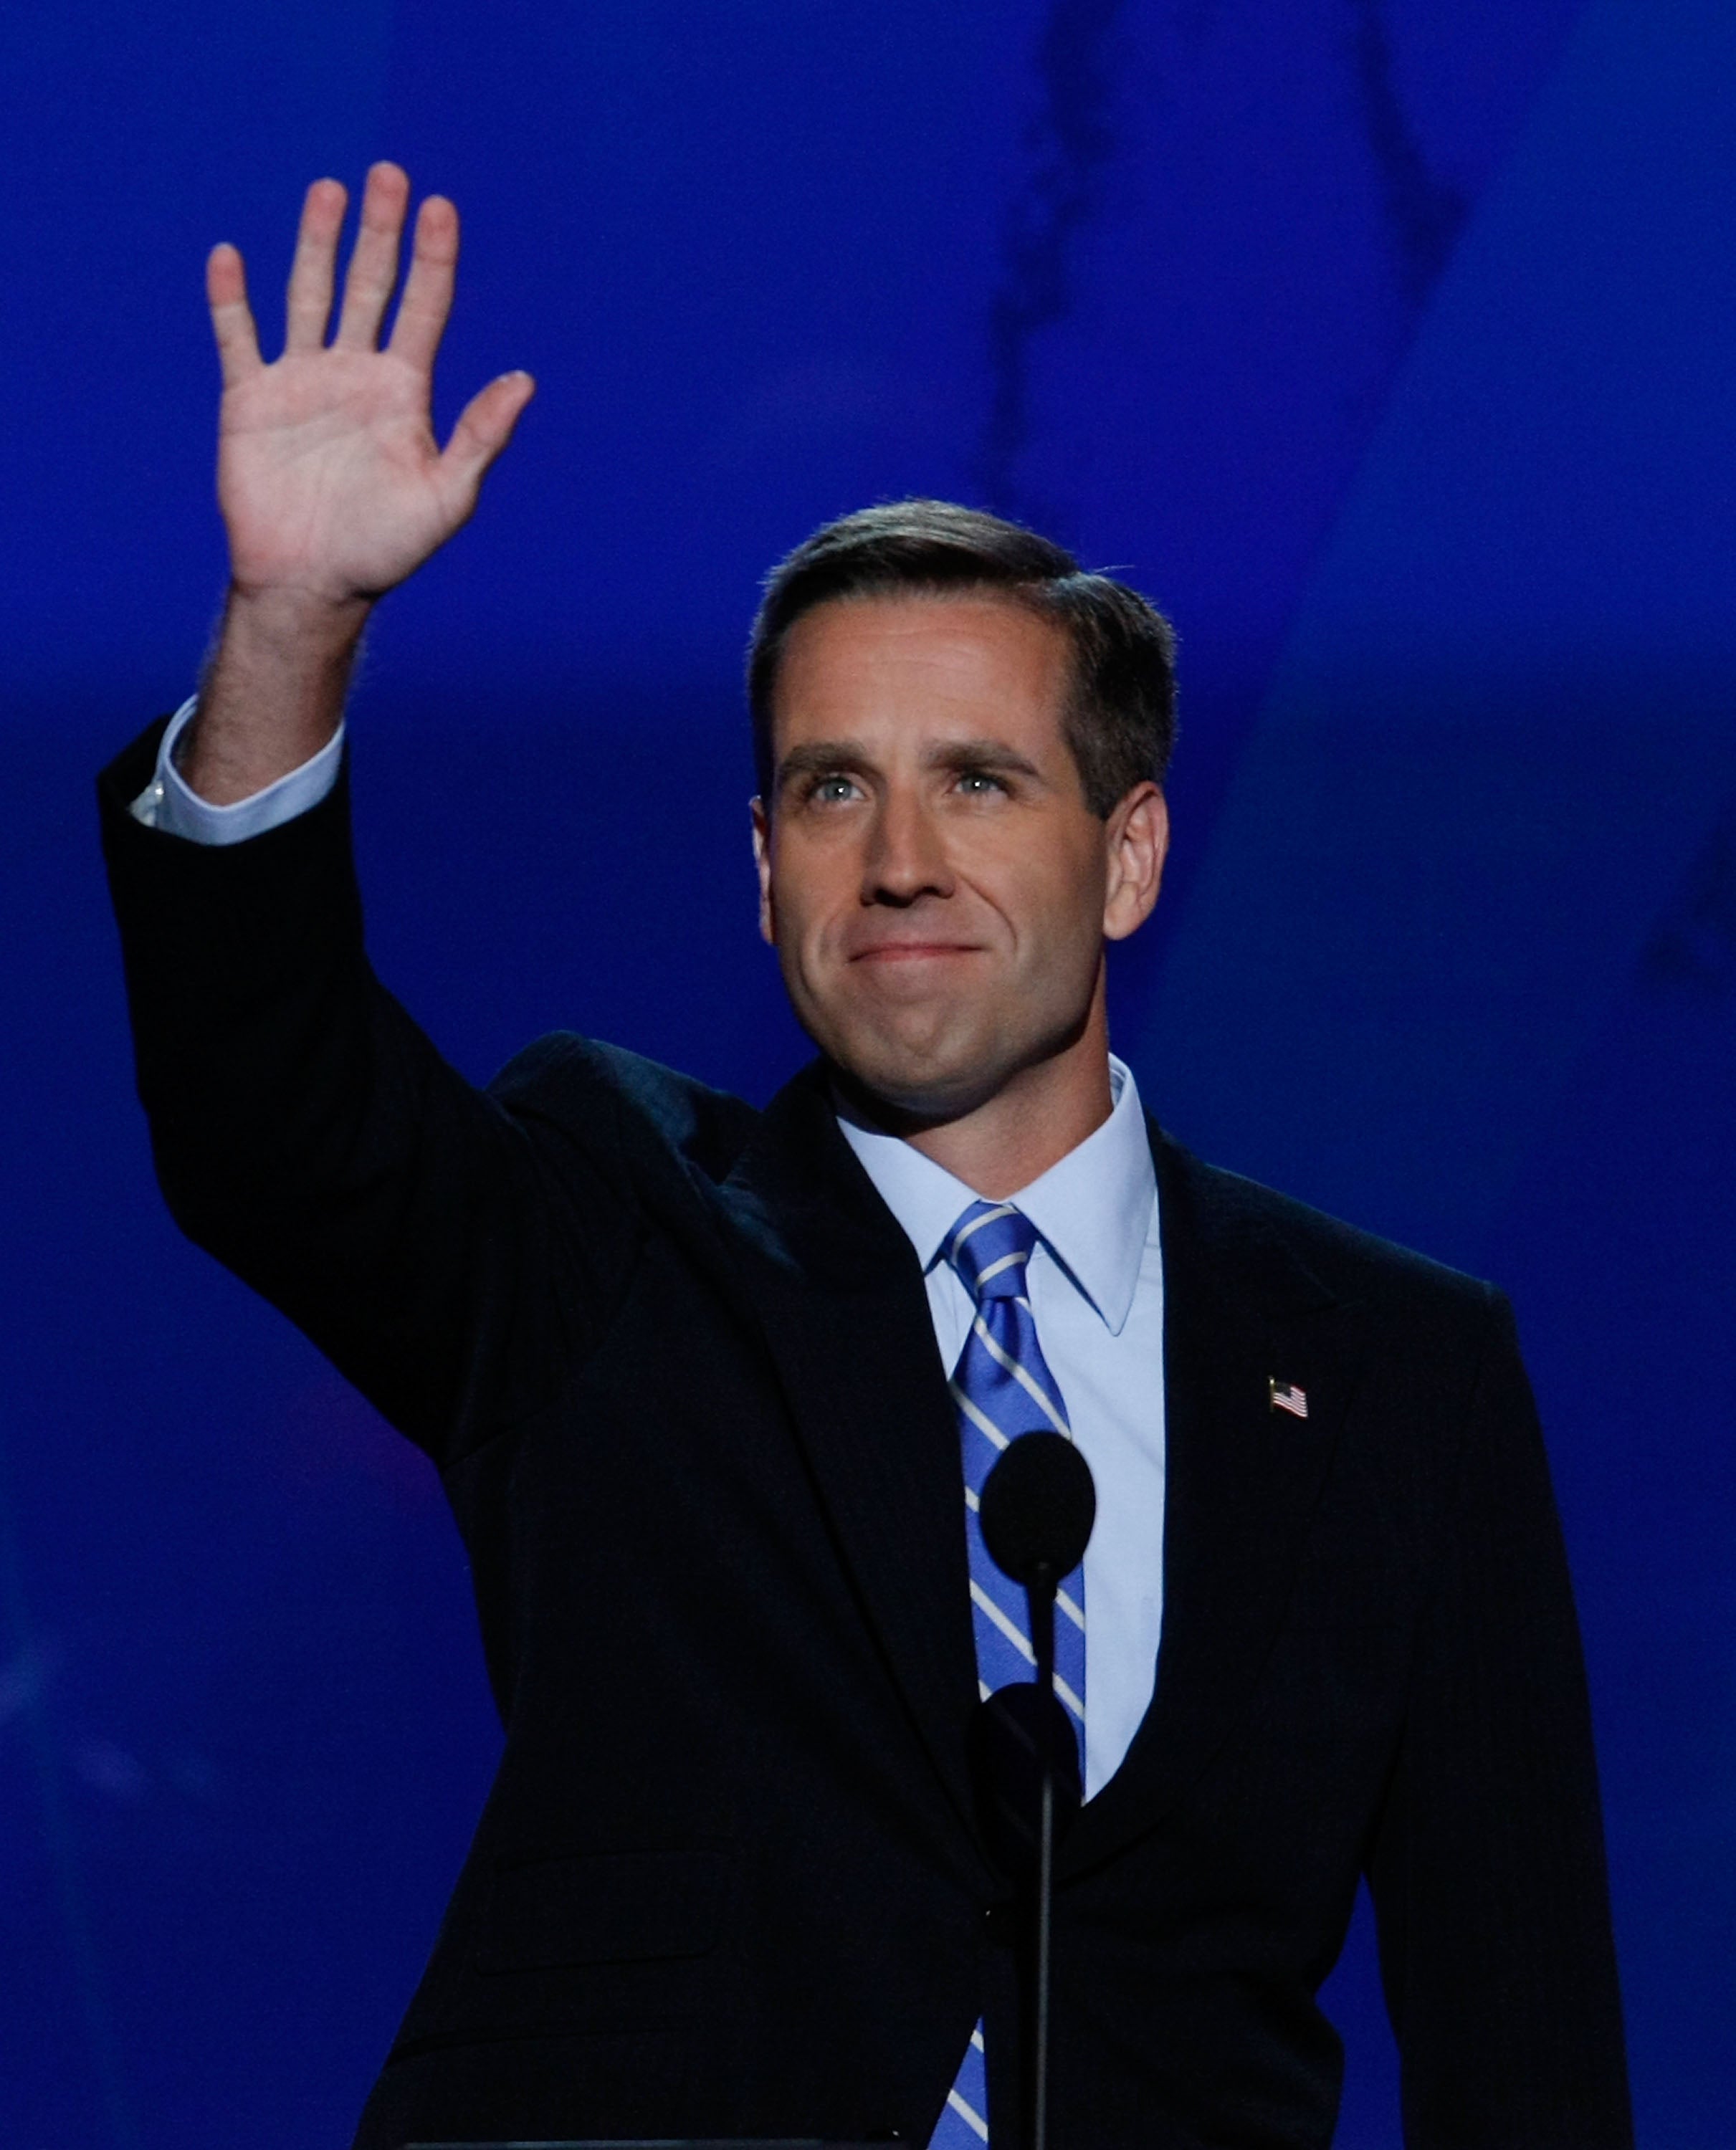 Beau Biden, Delaware Attorney General, pictured in 2008. He died from brain cancer in 2015